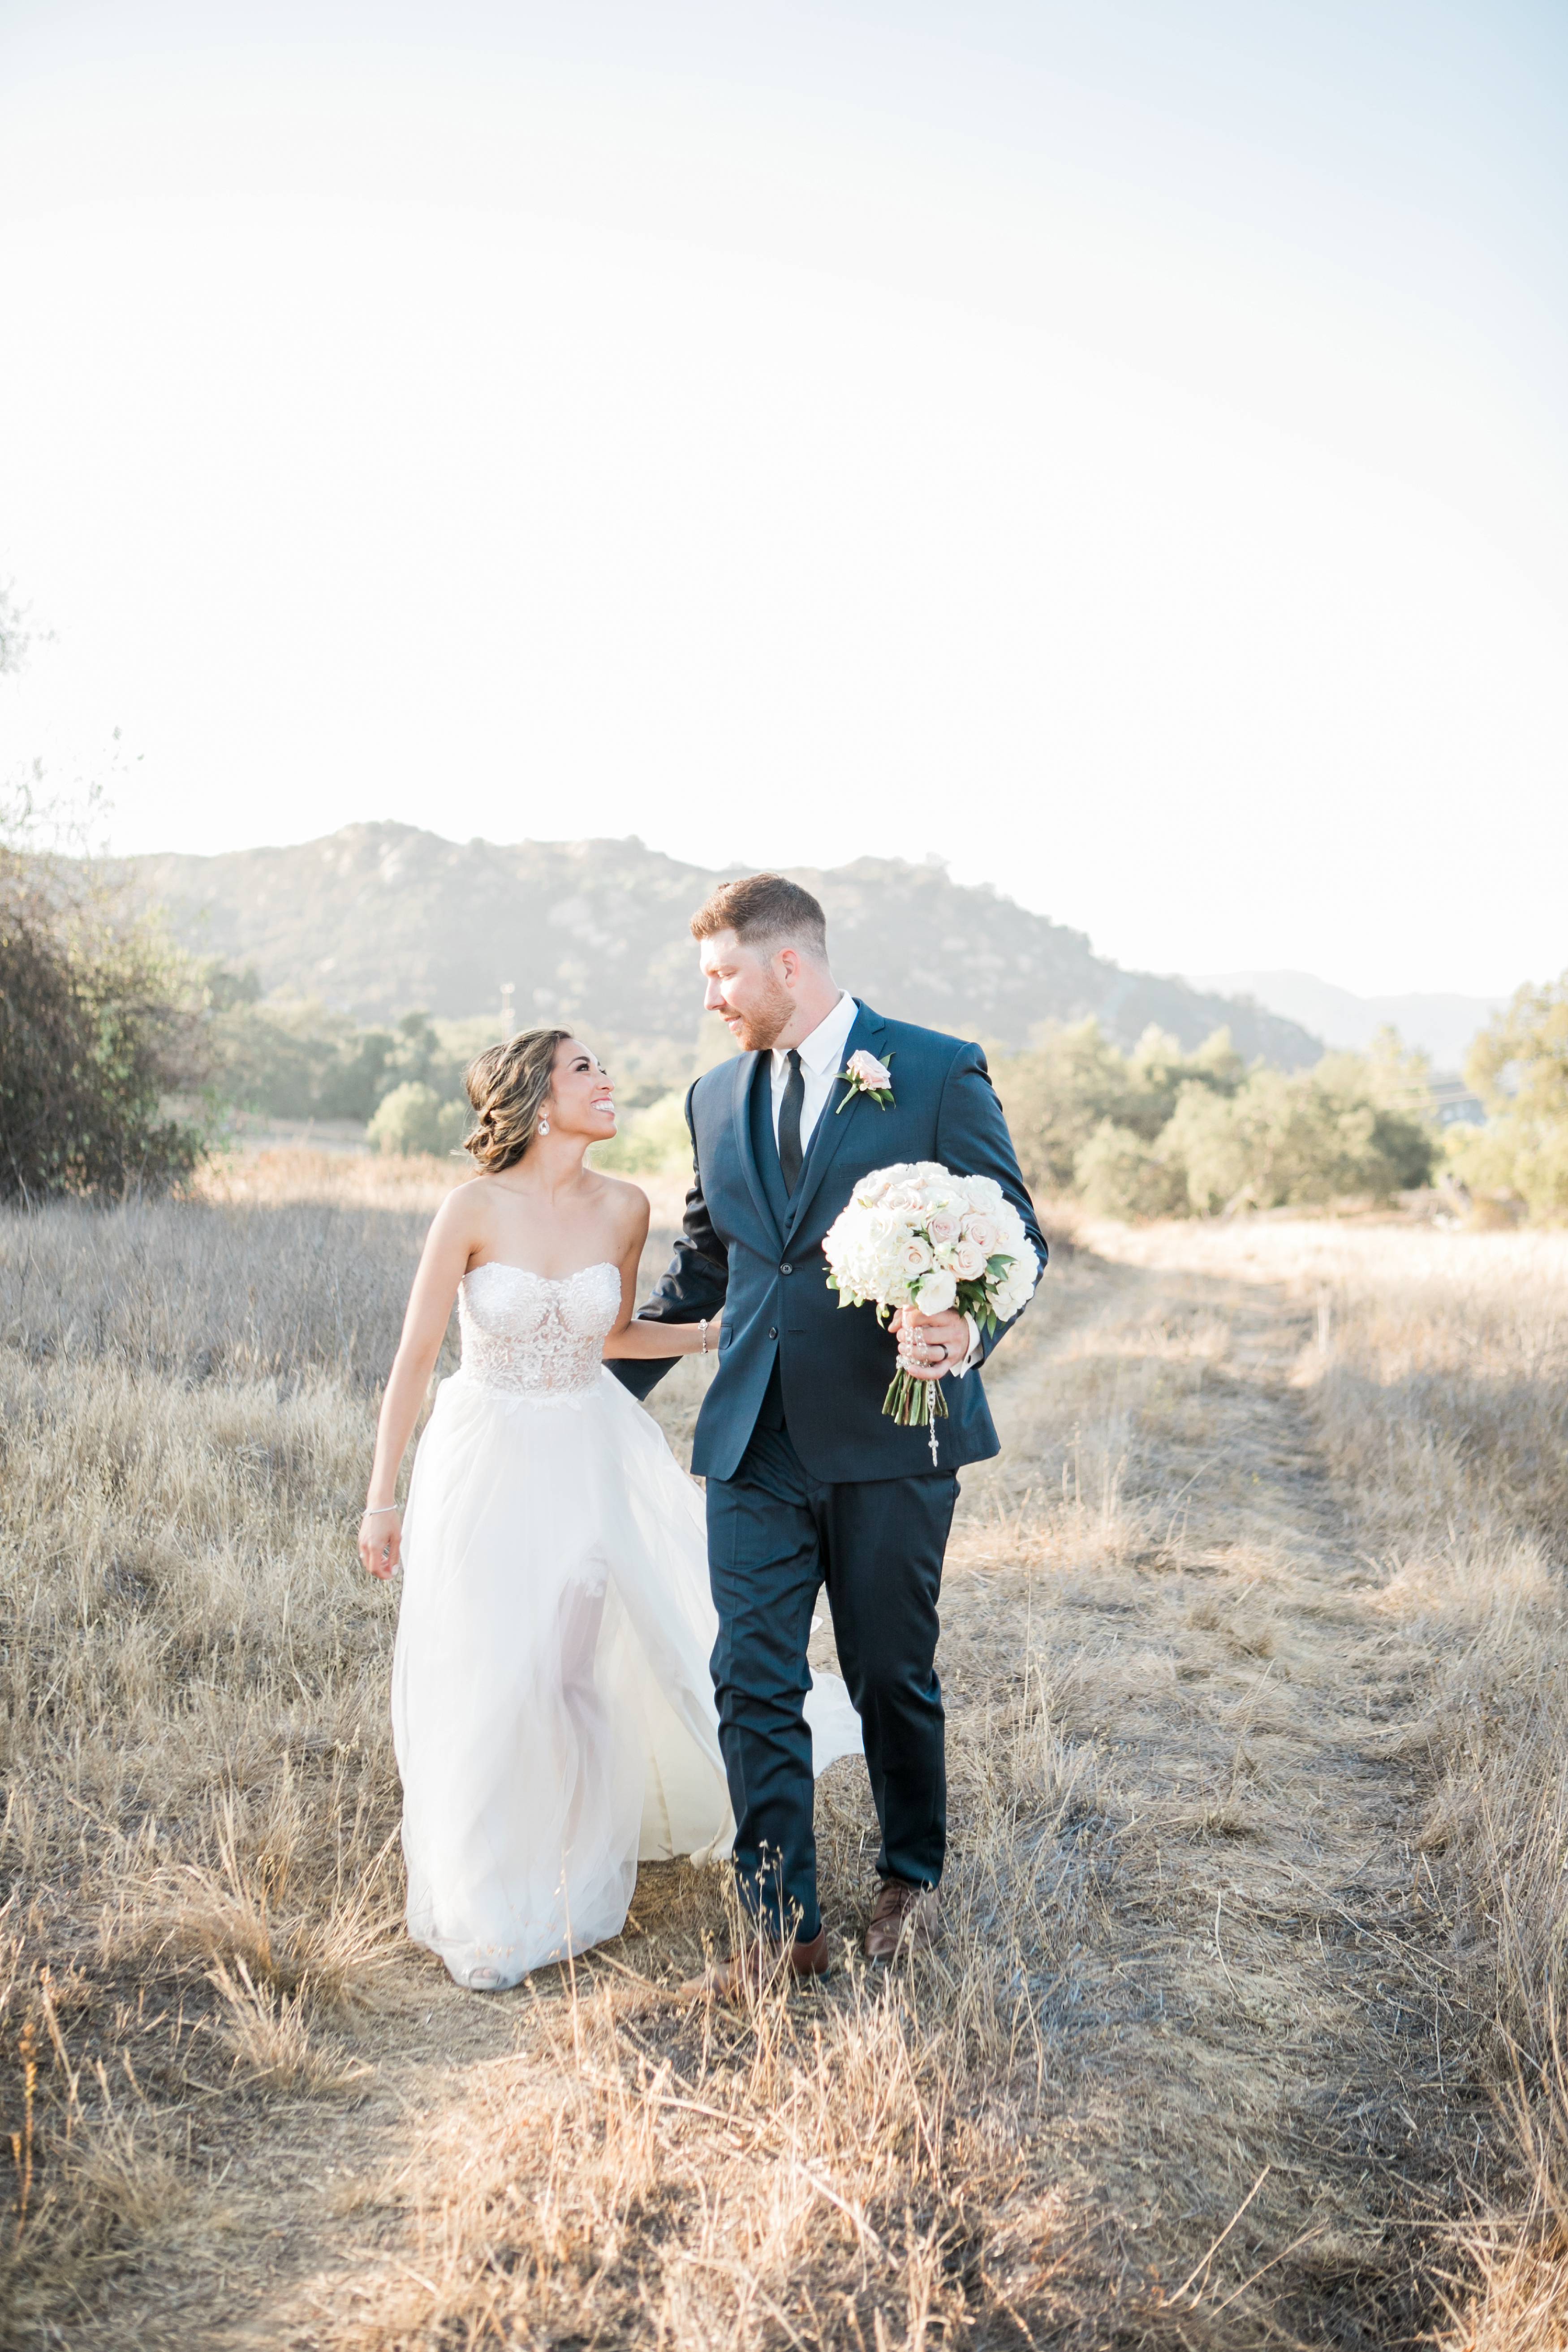 Bride and groom in the field at sunset at Forever and Always Farm wedding venue in Temecula California